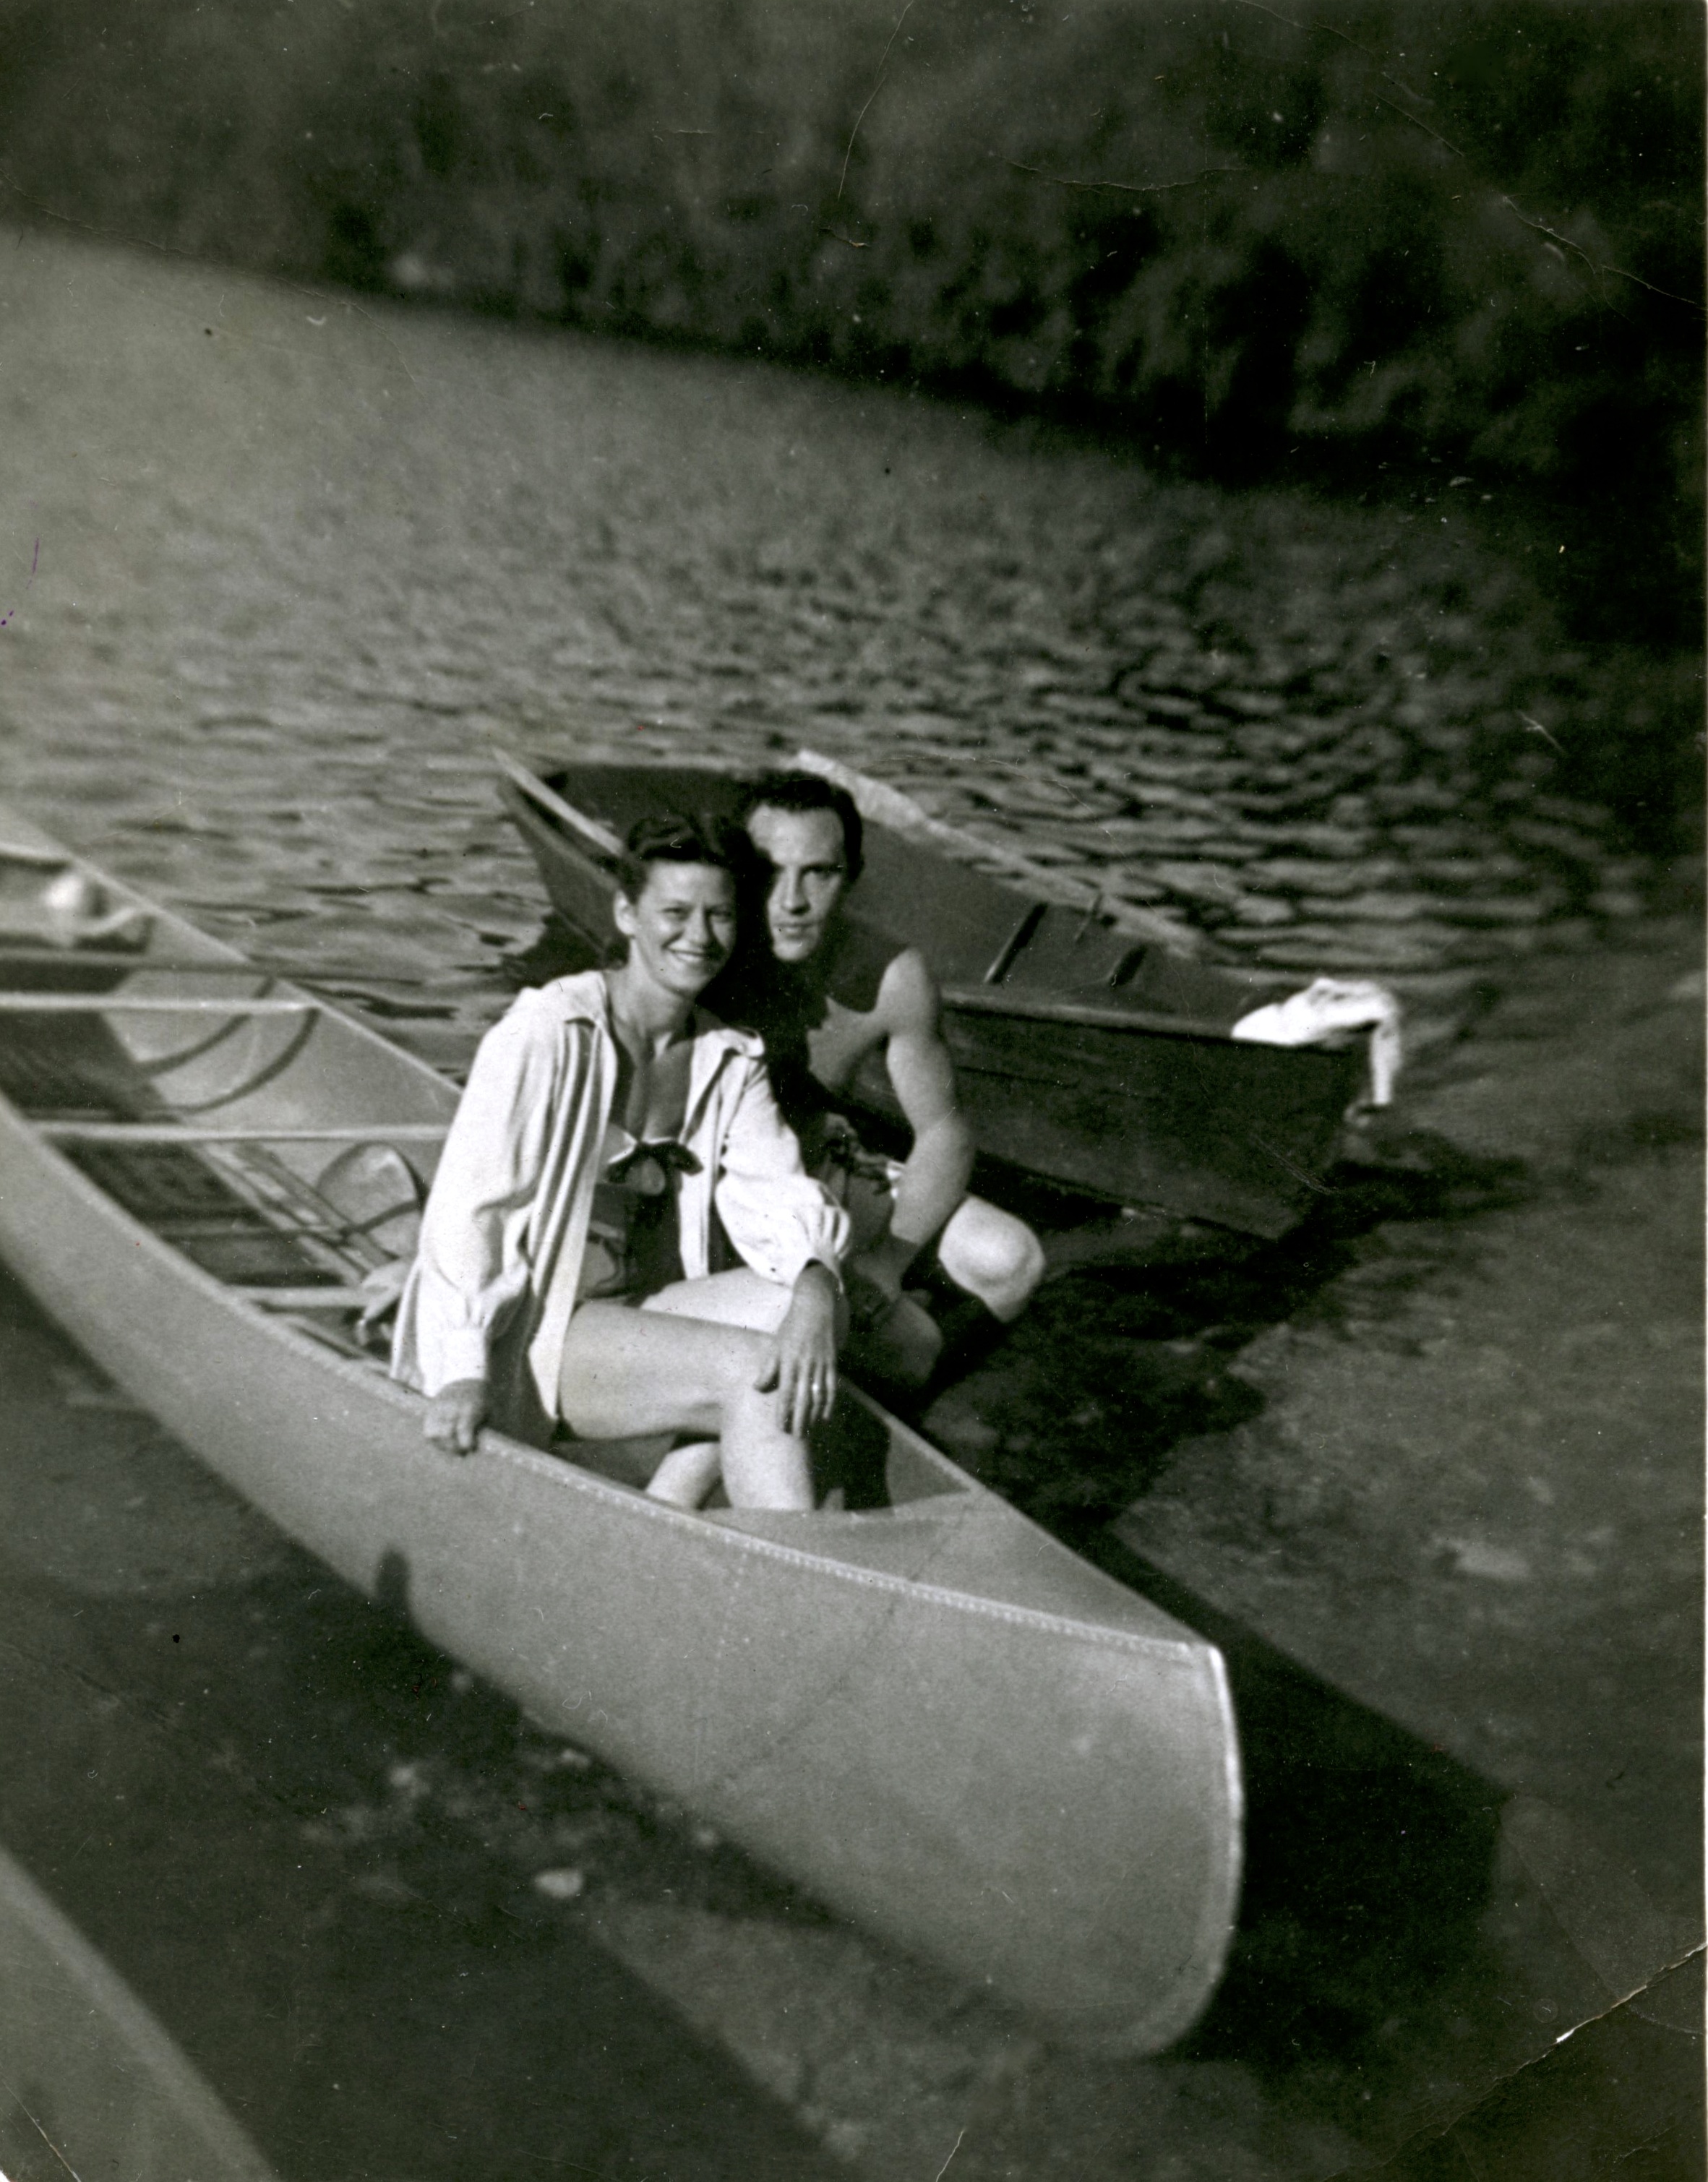 The Author's Grandparents on their honeymoon at the Nevele